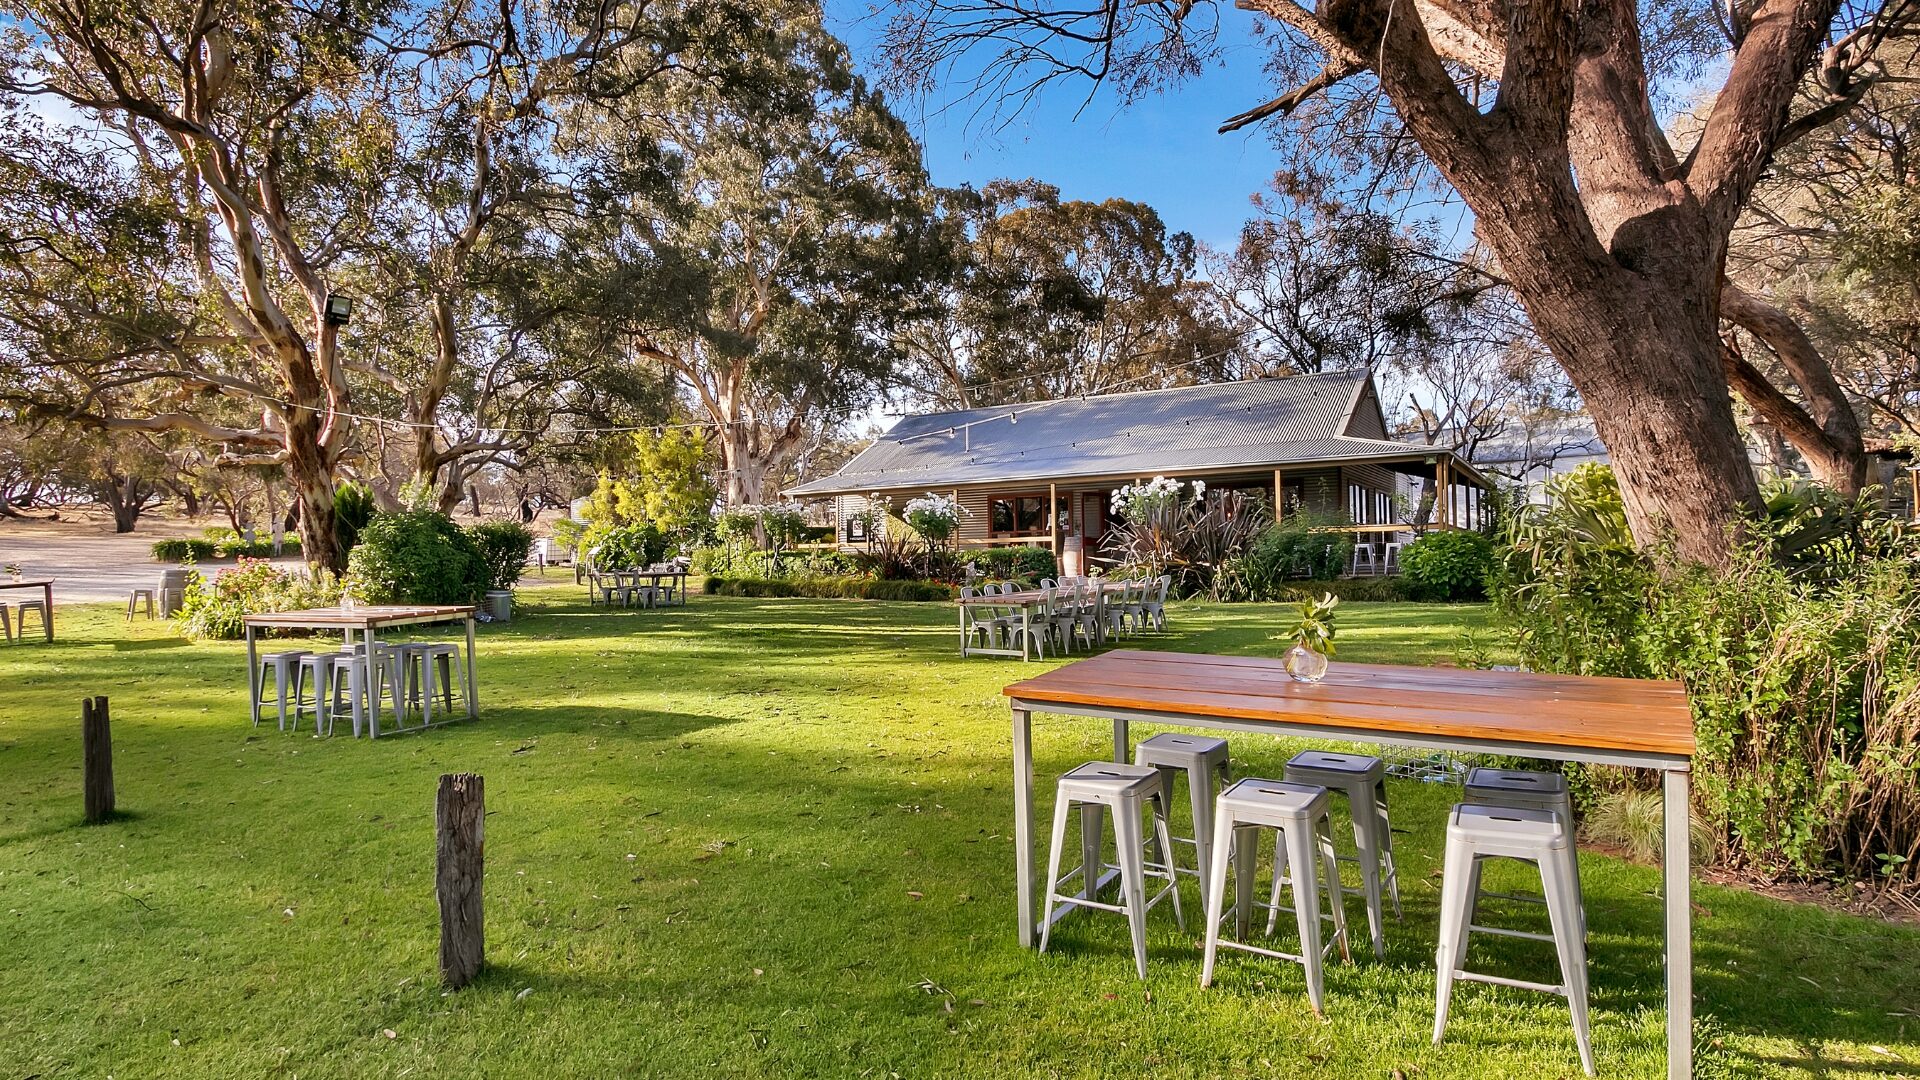 Whistler Wines cellar door - tables, chairs and lawn under the trees